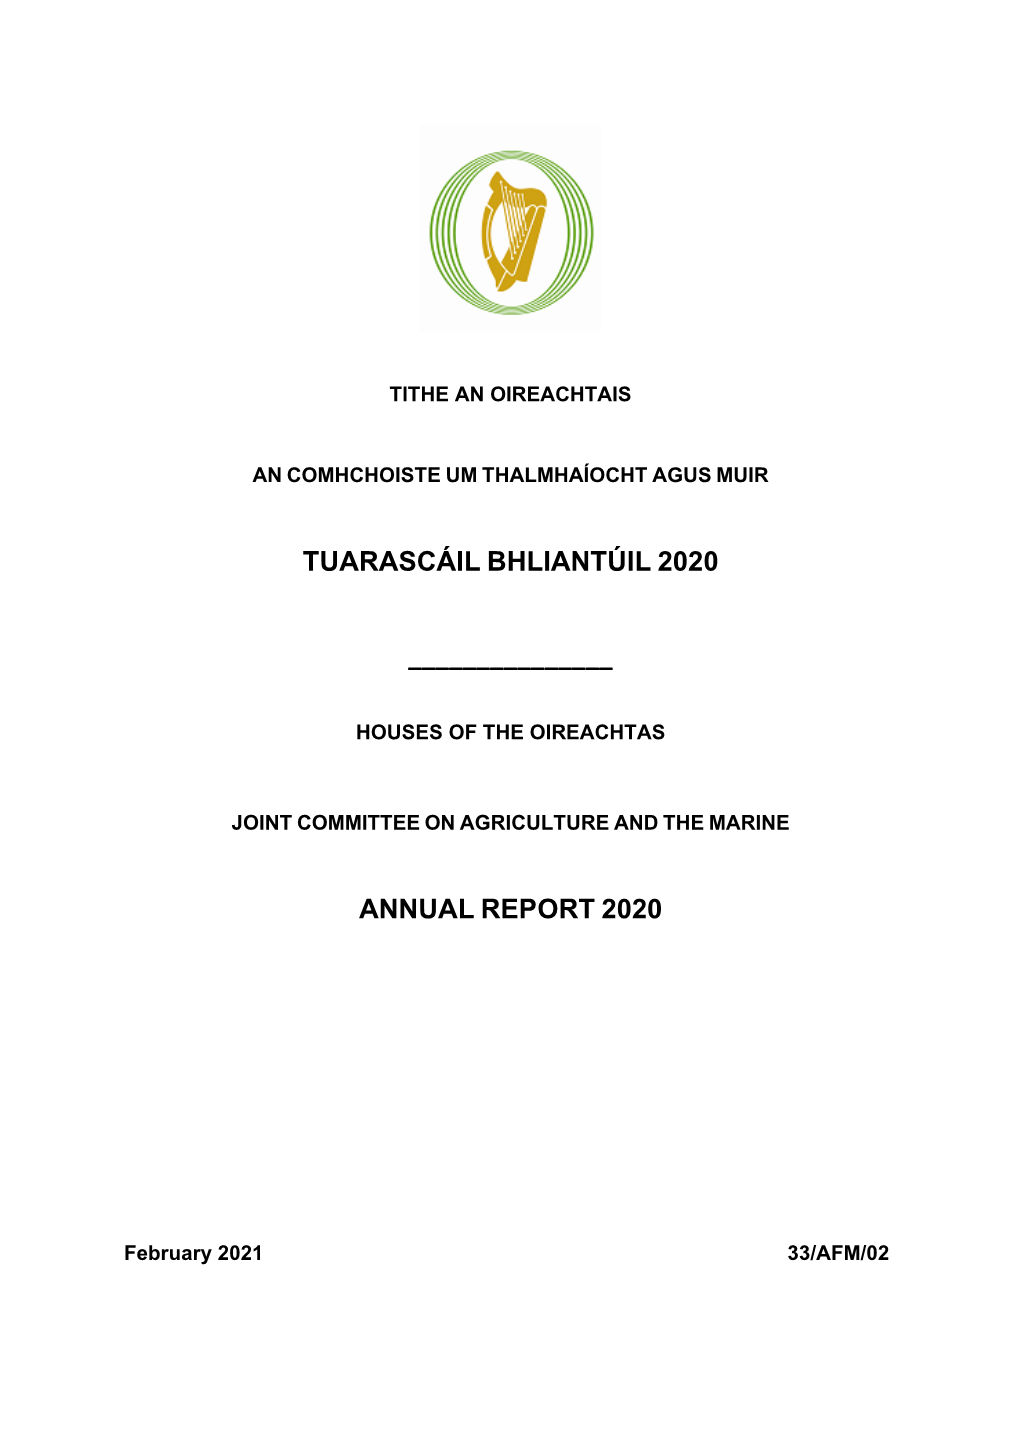 Annual Report 2020, Joint Committee on Agriculture and the Marine